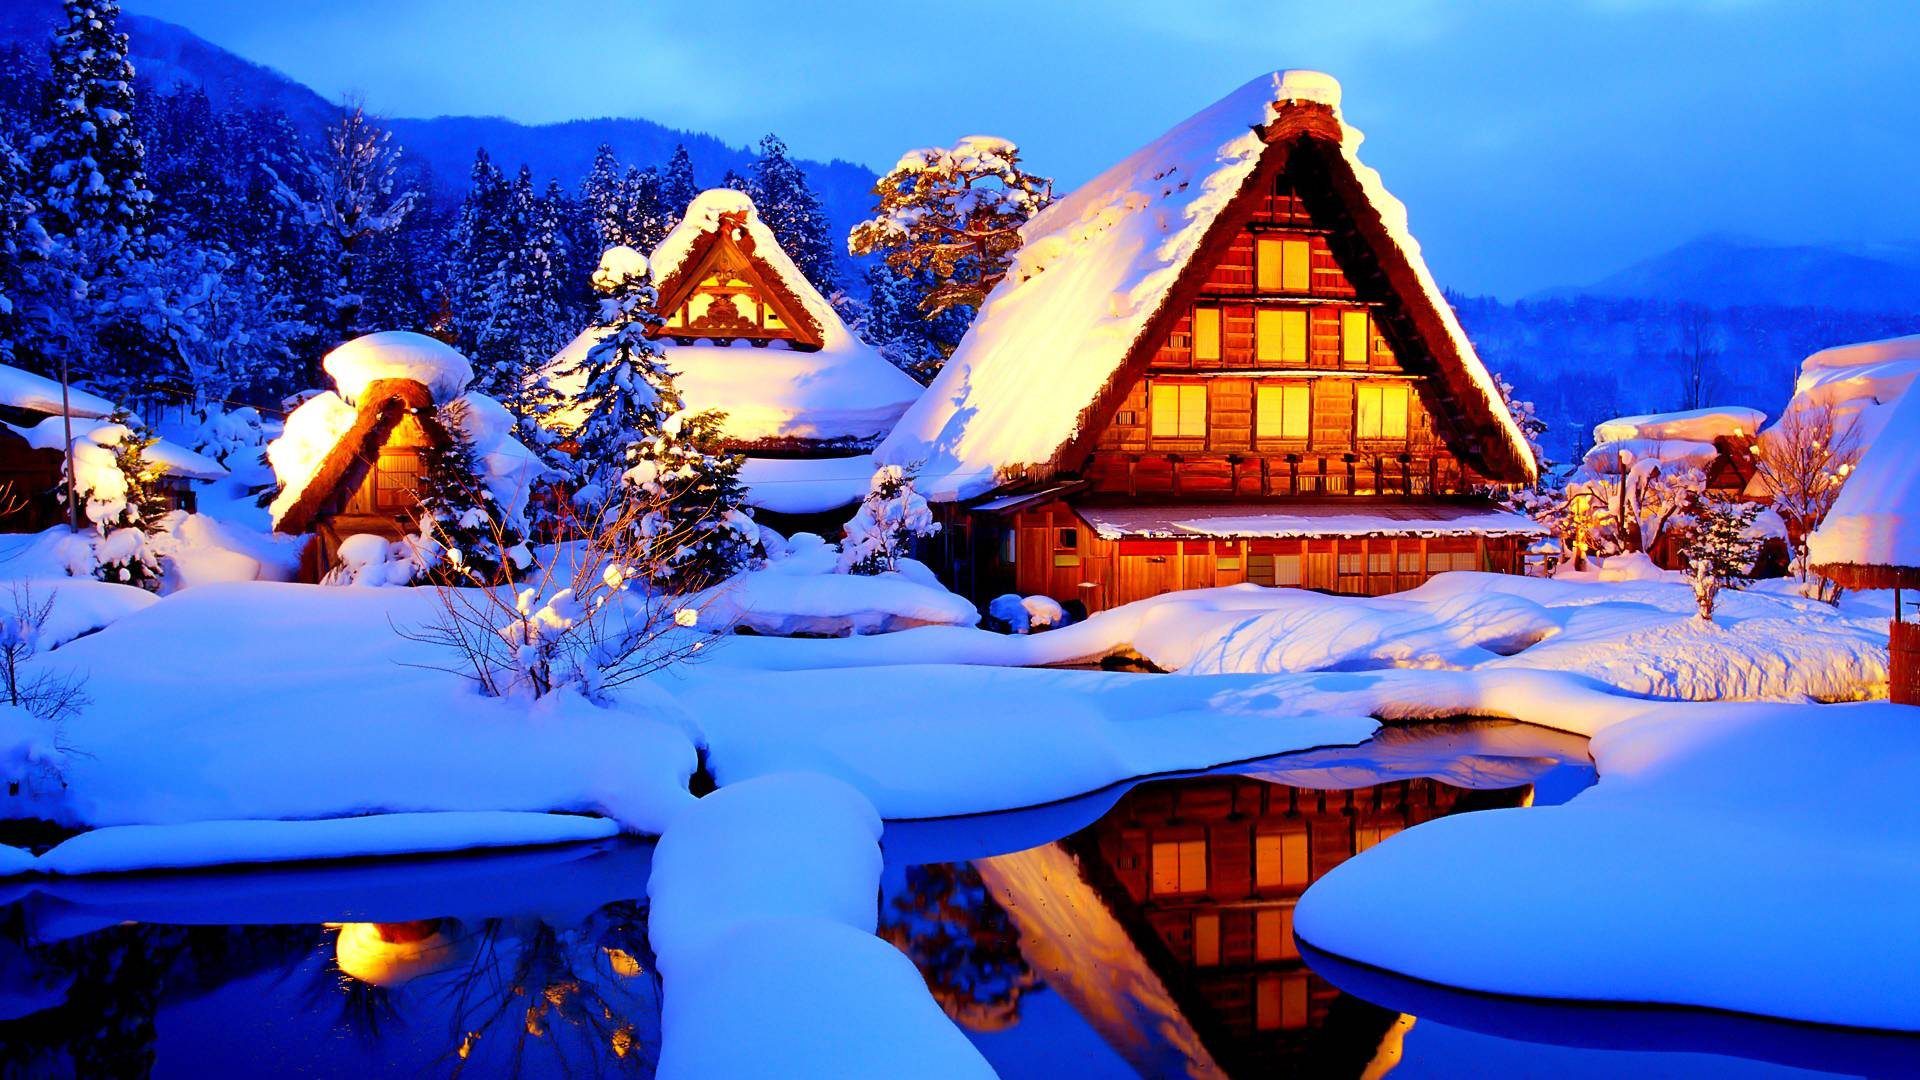 1920x1080 Christmas Cabin Wallpapers Top Free Christmas Cabin Backgrounds